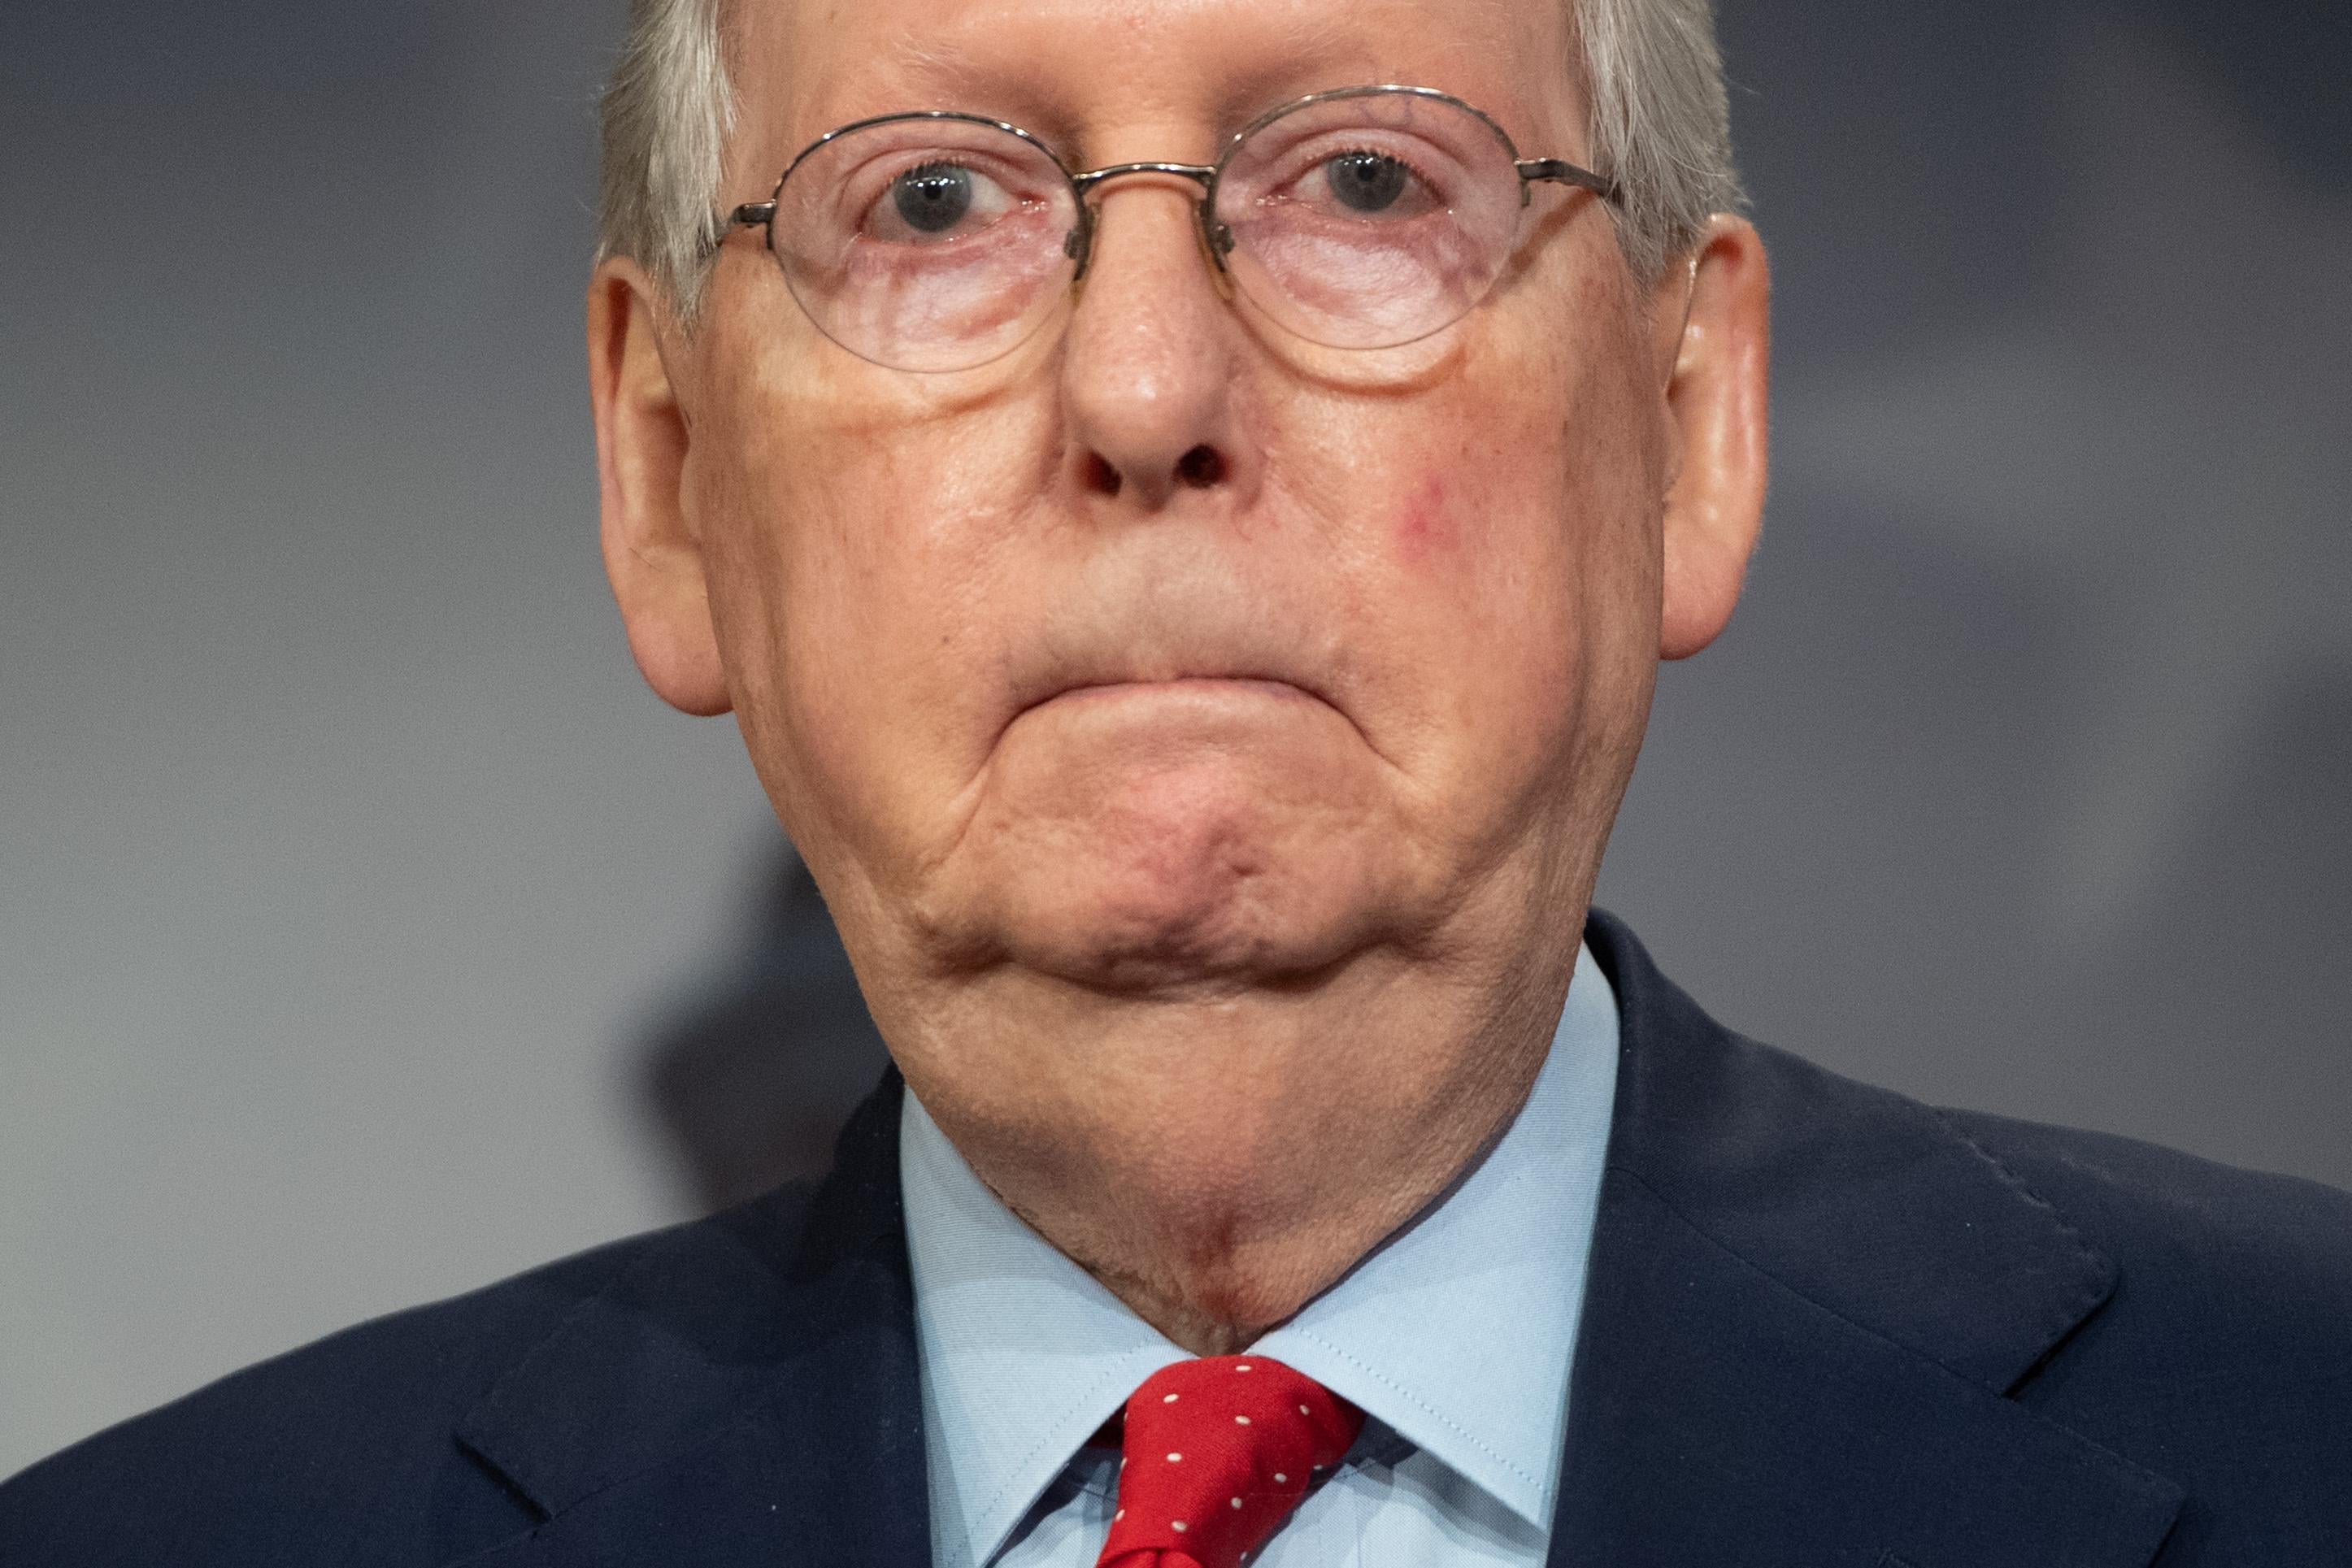 Senate Majority Leader Mitch McConnell holds a press conference.